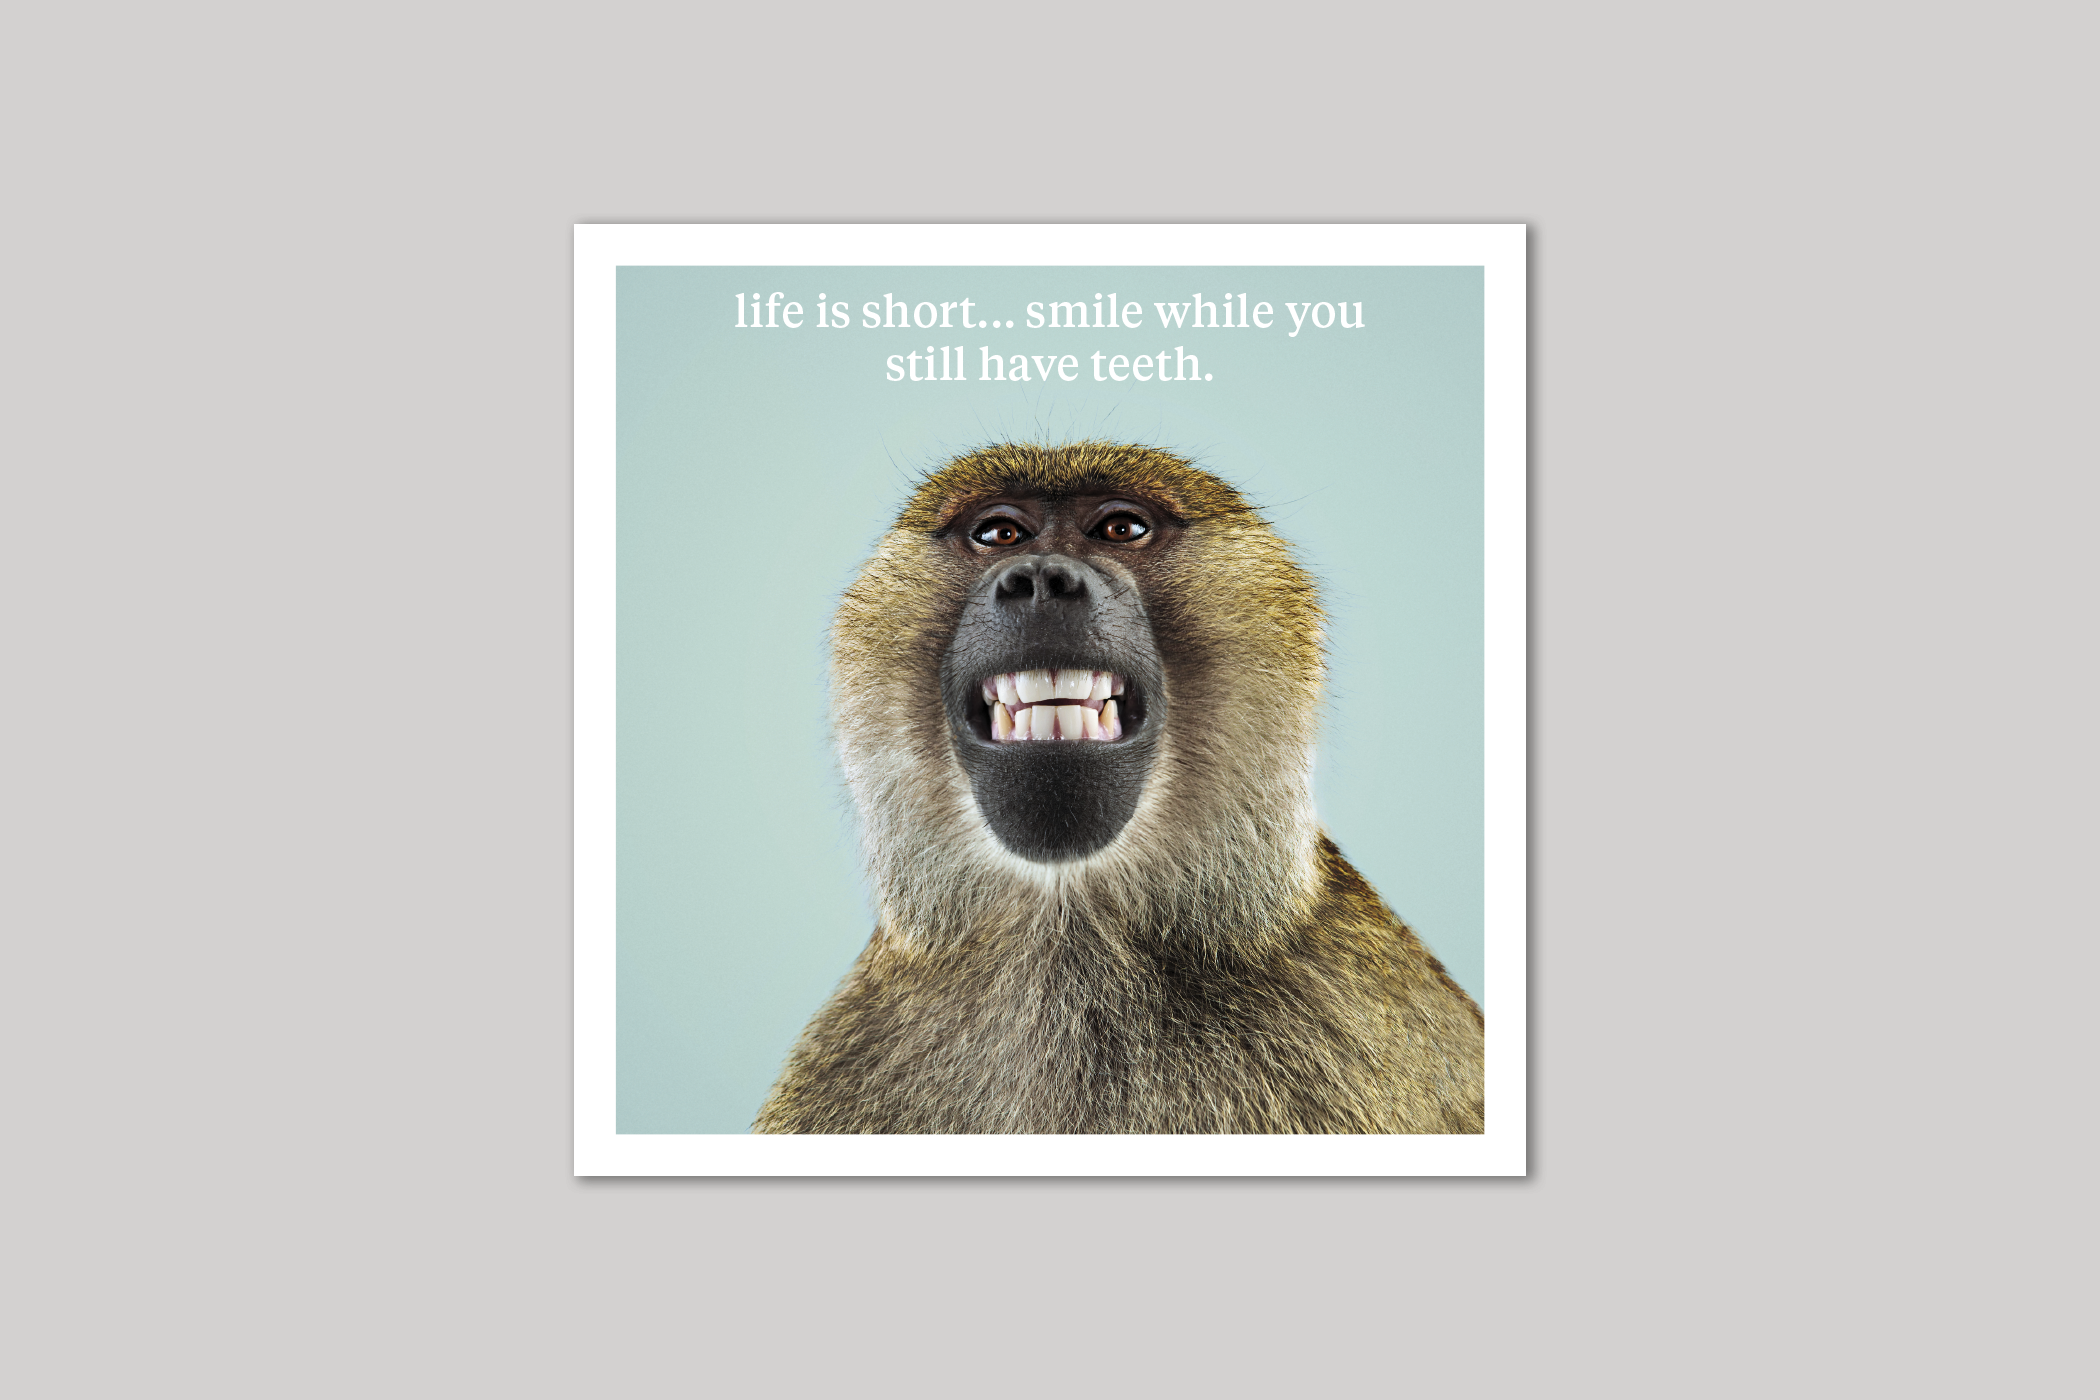 Smile quirky animal portrait from Curious World range of greeting cards by Icon.